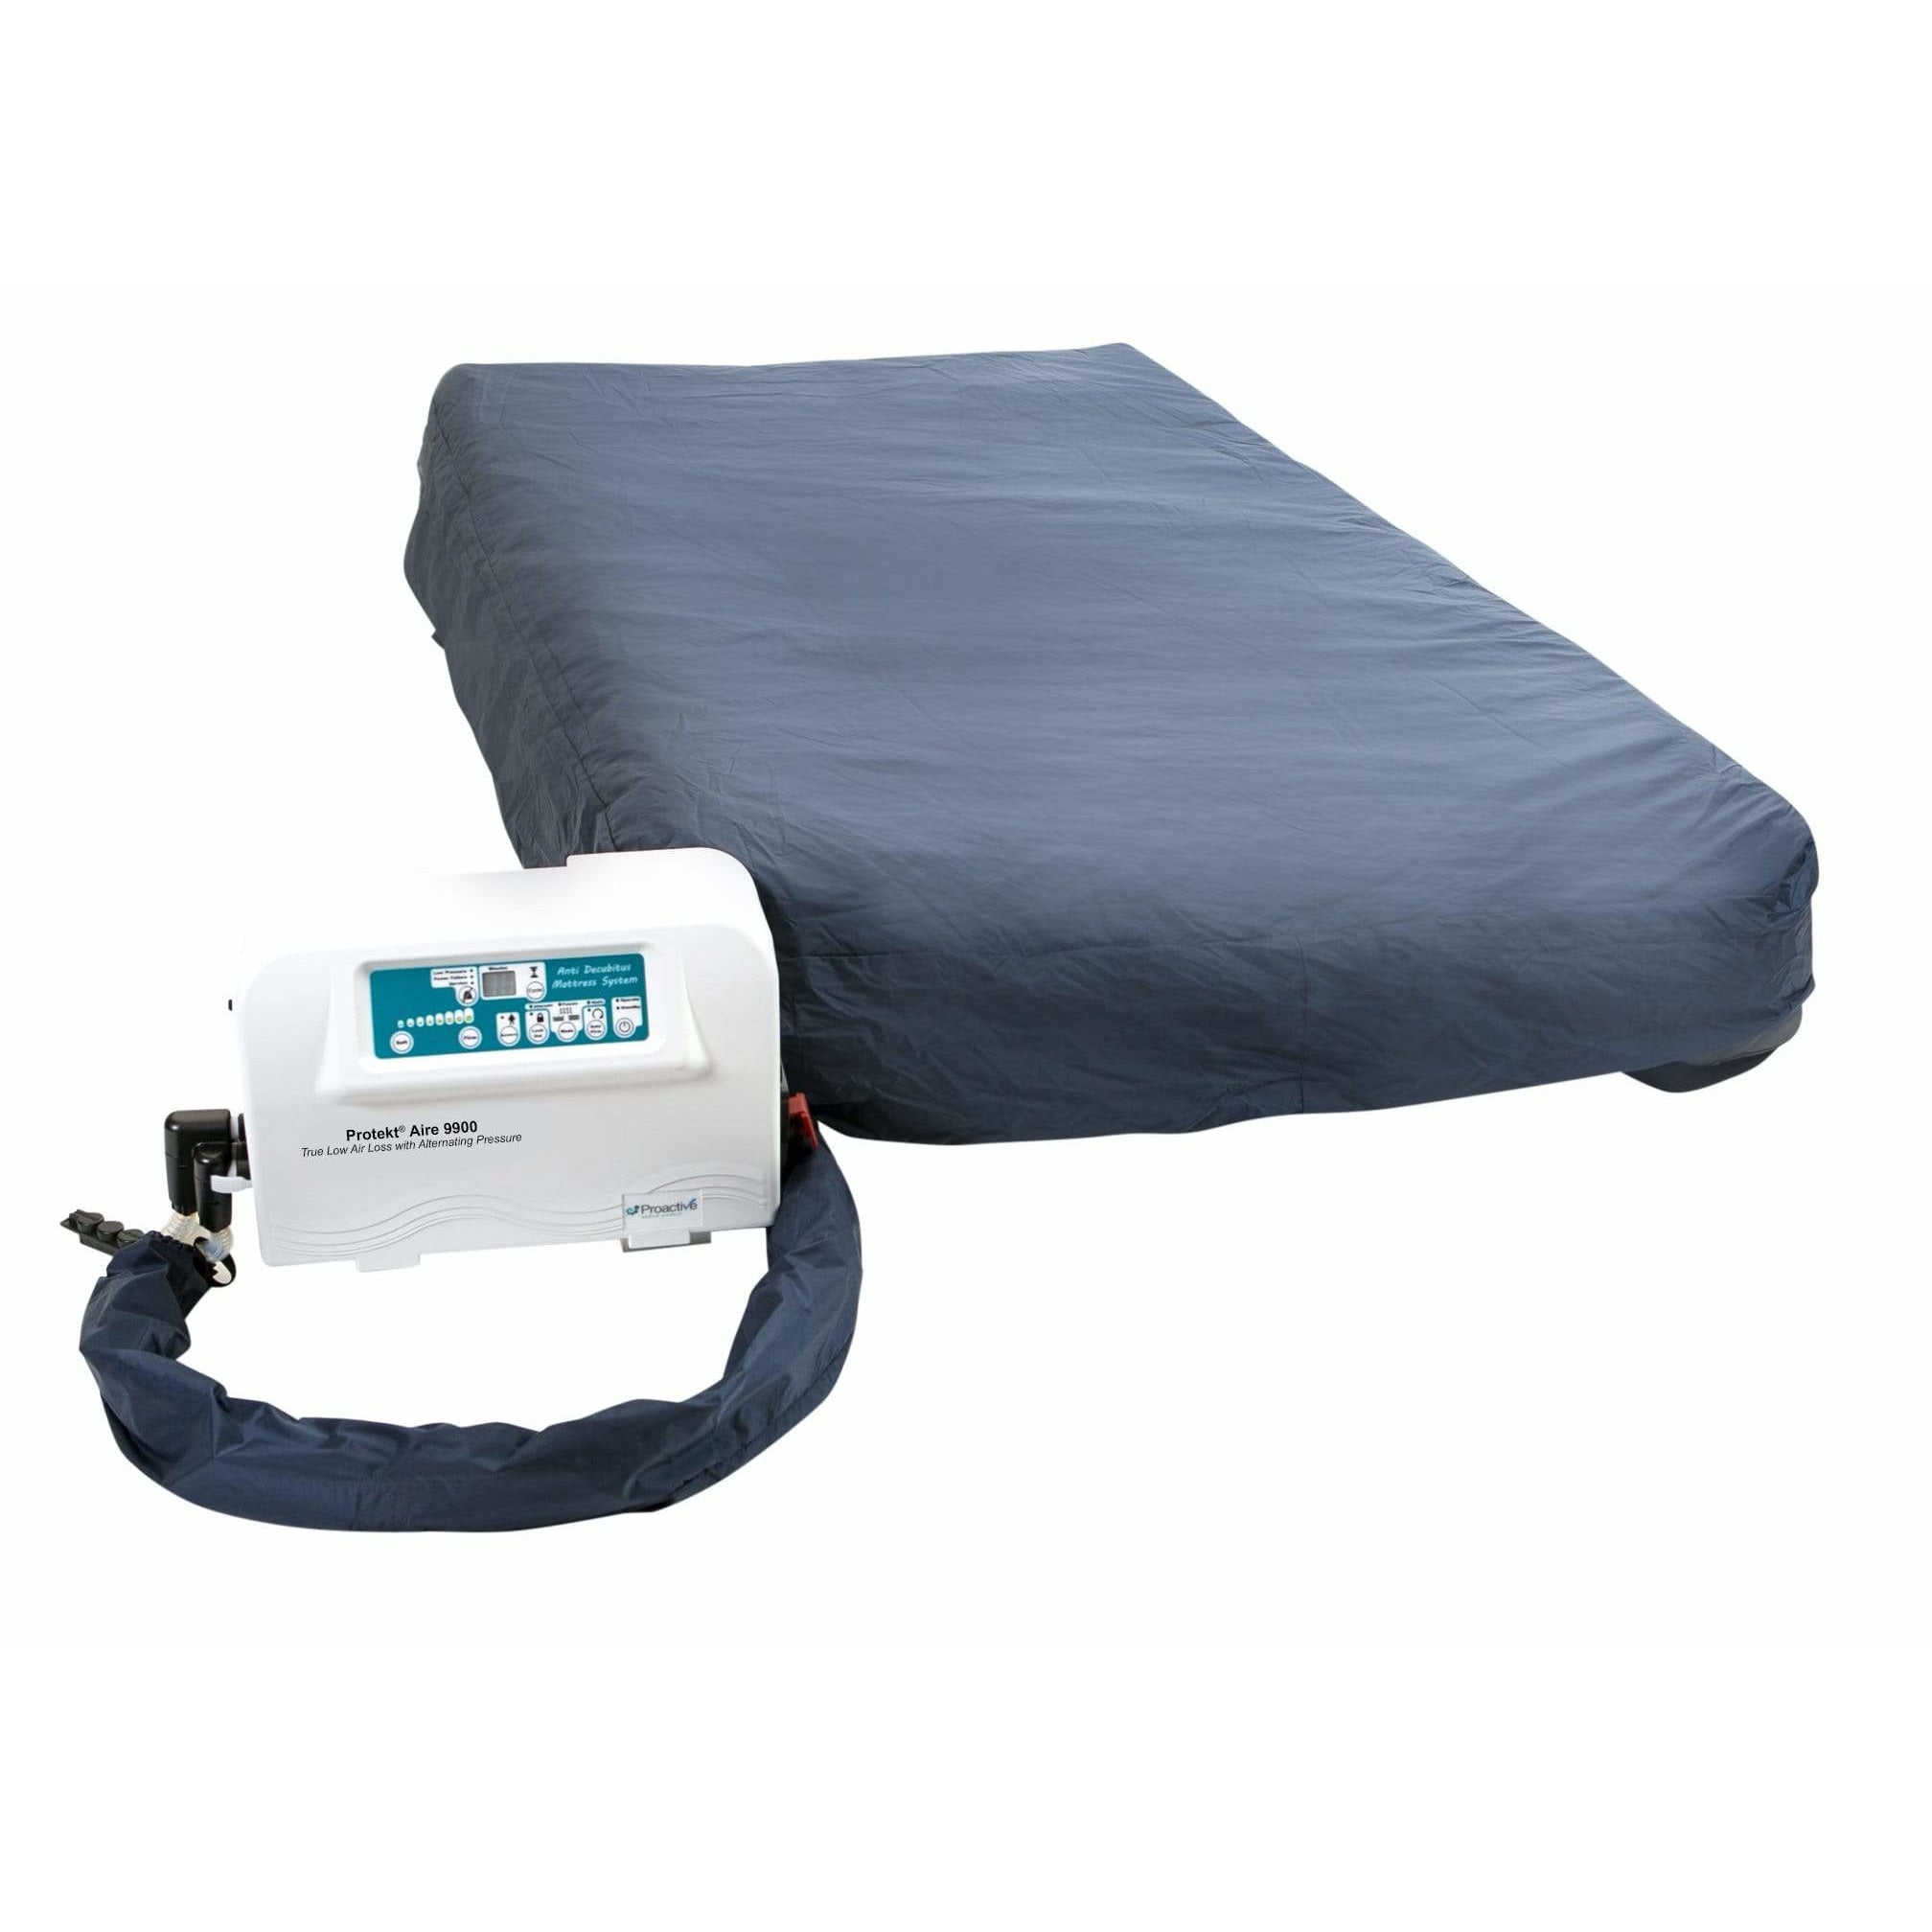 Proactive Medical Protekt Aire 9900 Low Air Loss/Alternating Pressure Mattress System